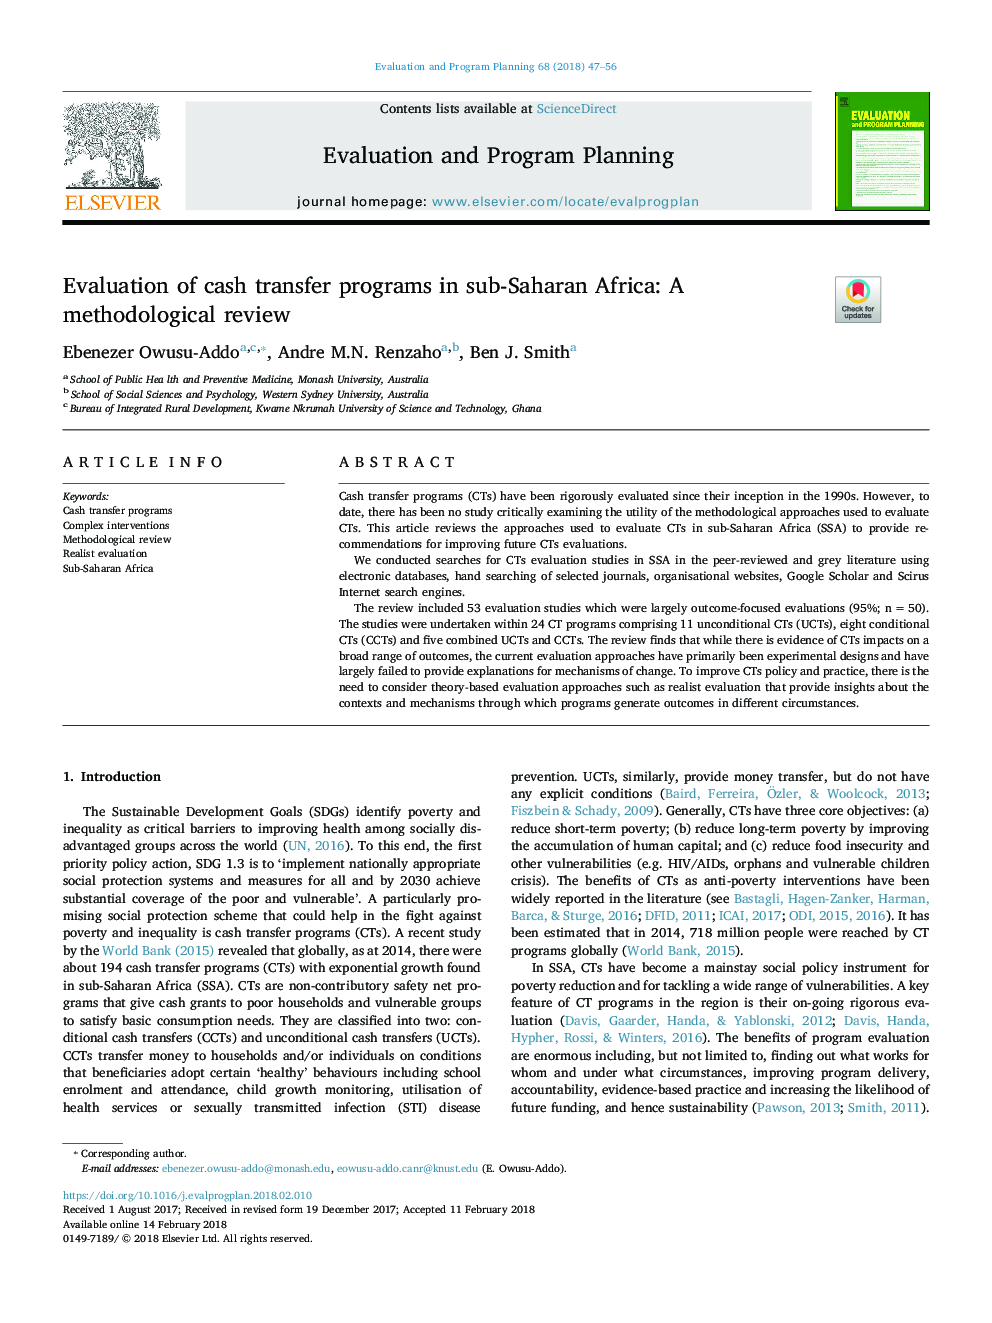 Evaluation of cash transfer programs in sub-Saharan Africa: A methodological review